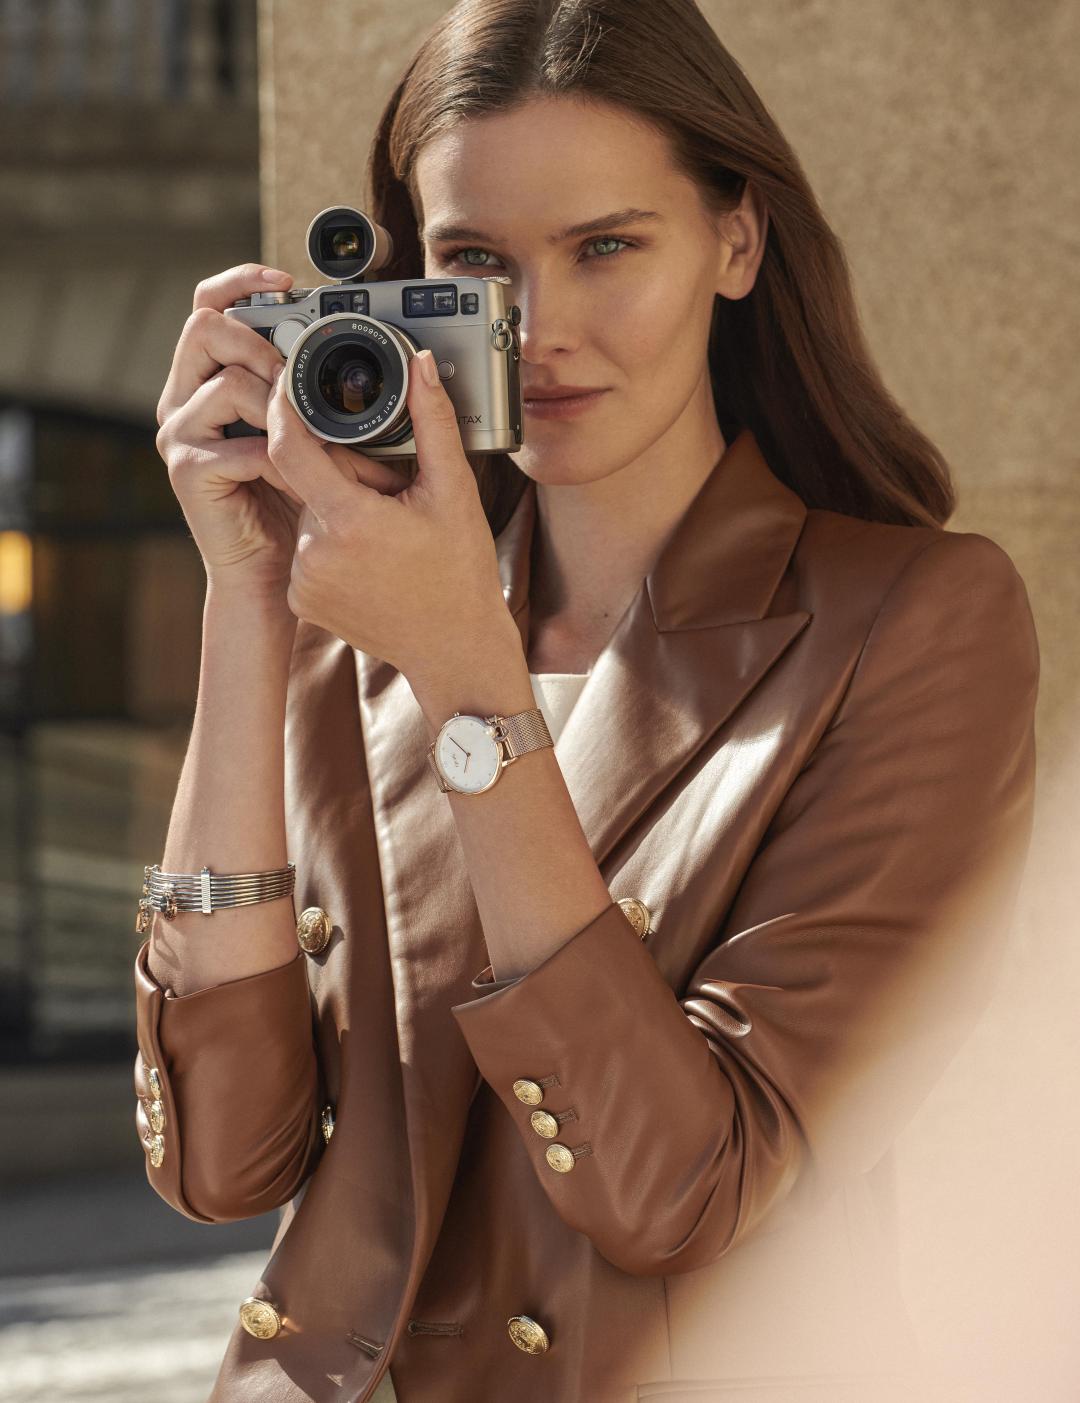 Magdalena for ONE watches